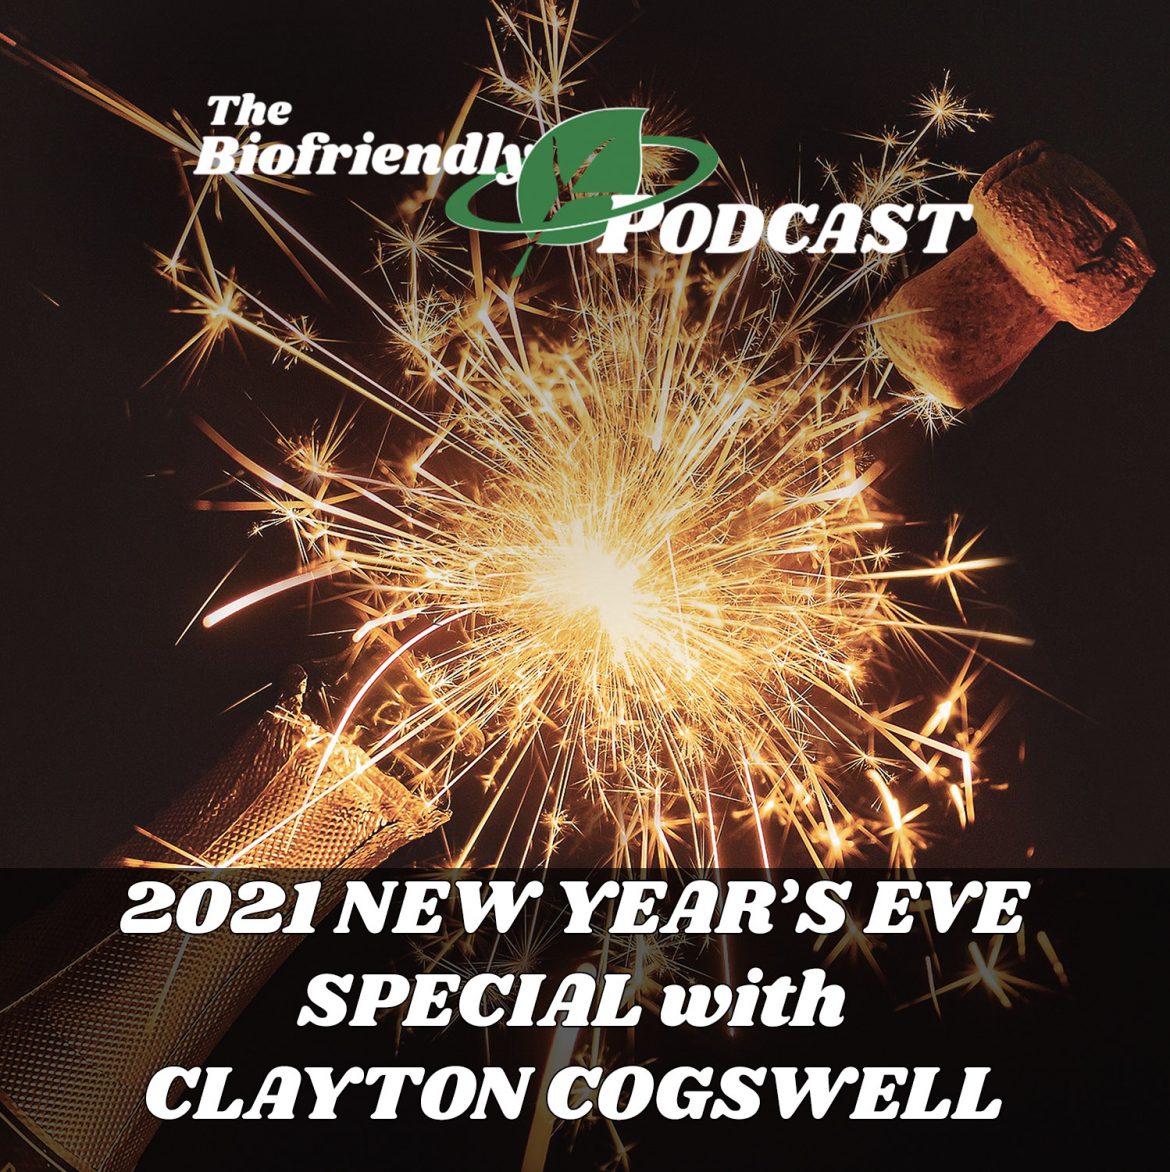 2021 New Year’s Eve Special with Clayton Cogswell